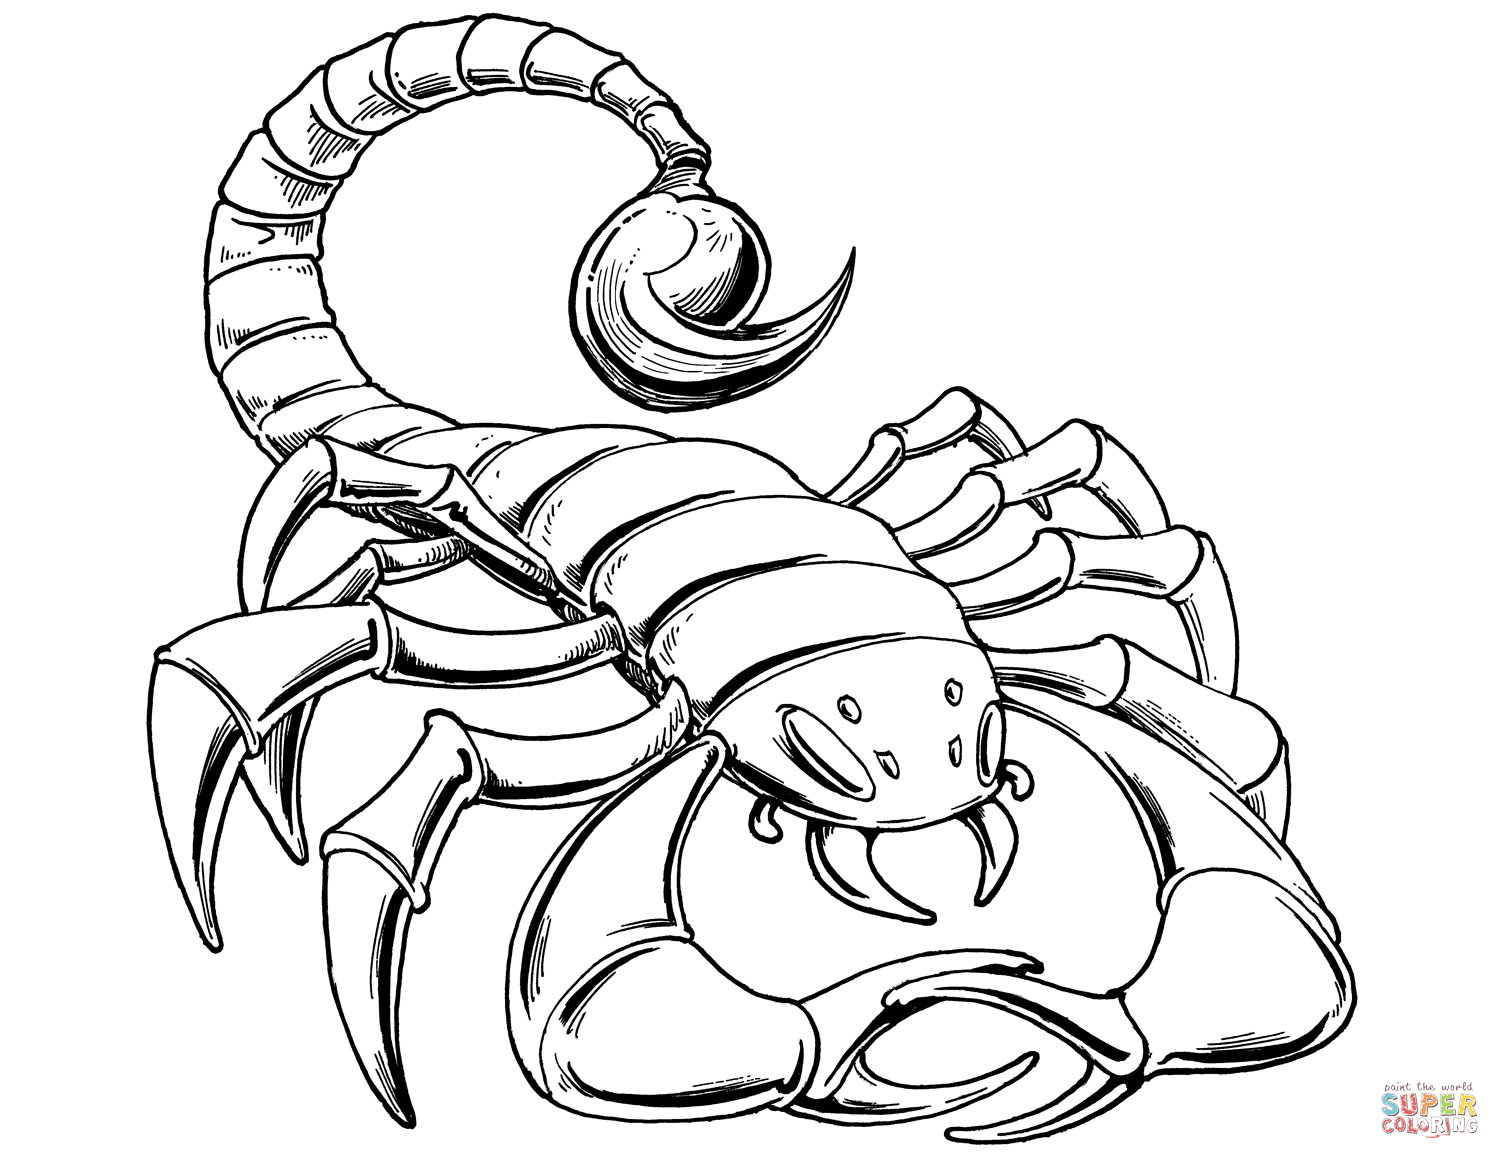 Prehistoric Scorpion coloring page | Free Printable Coloring Pages